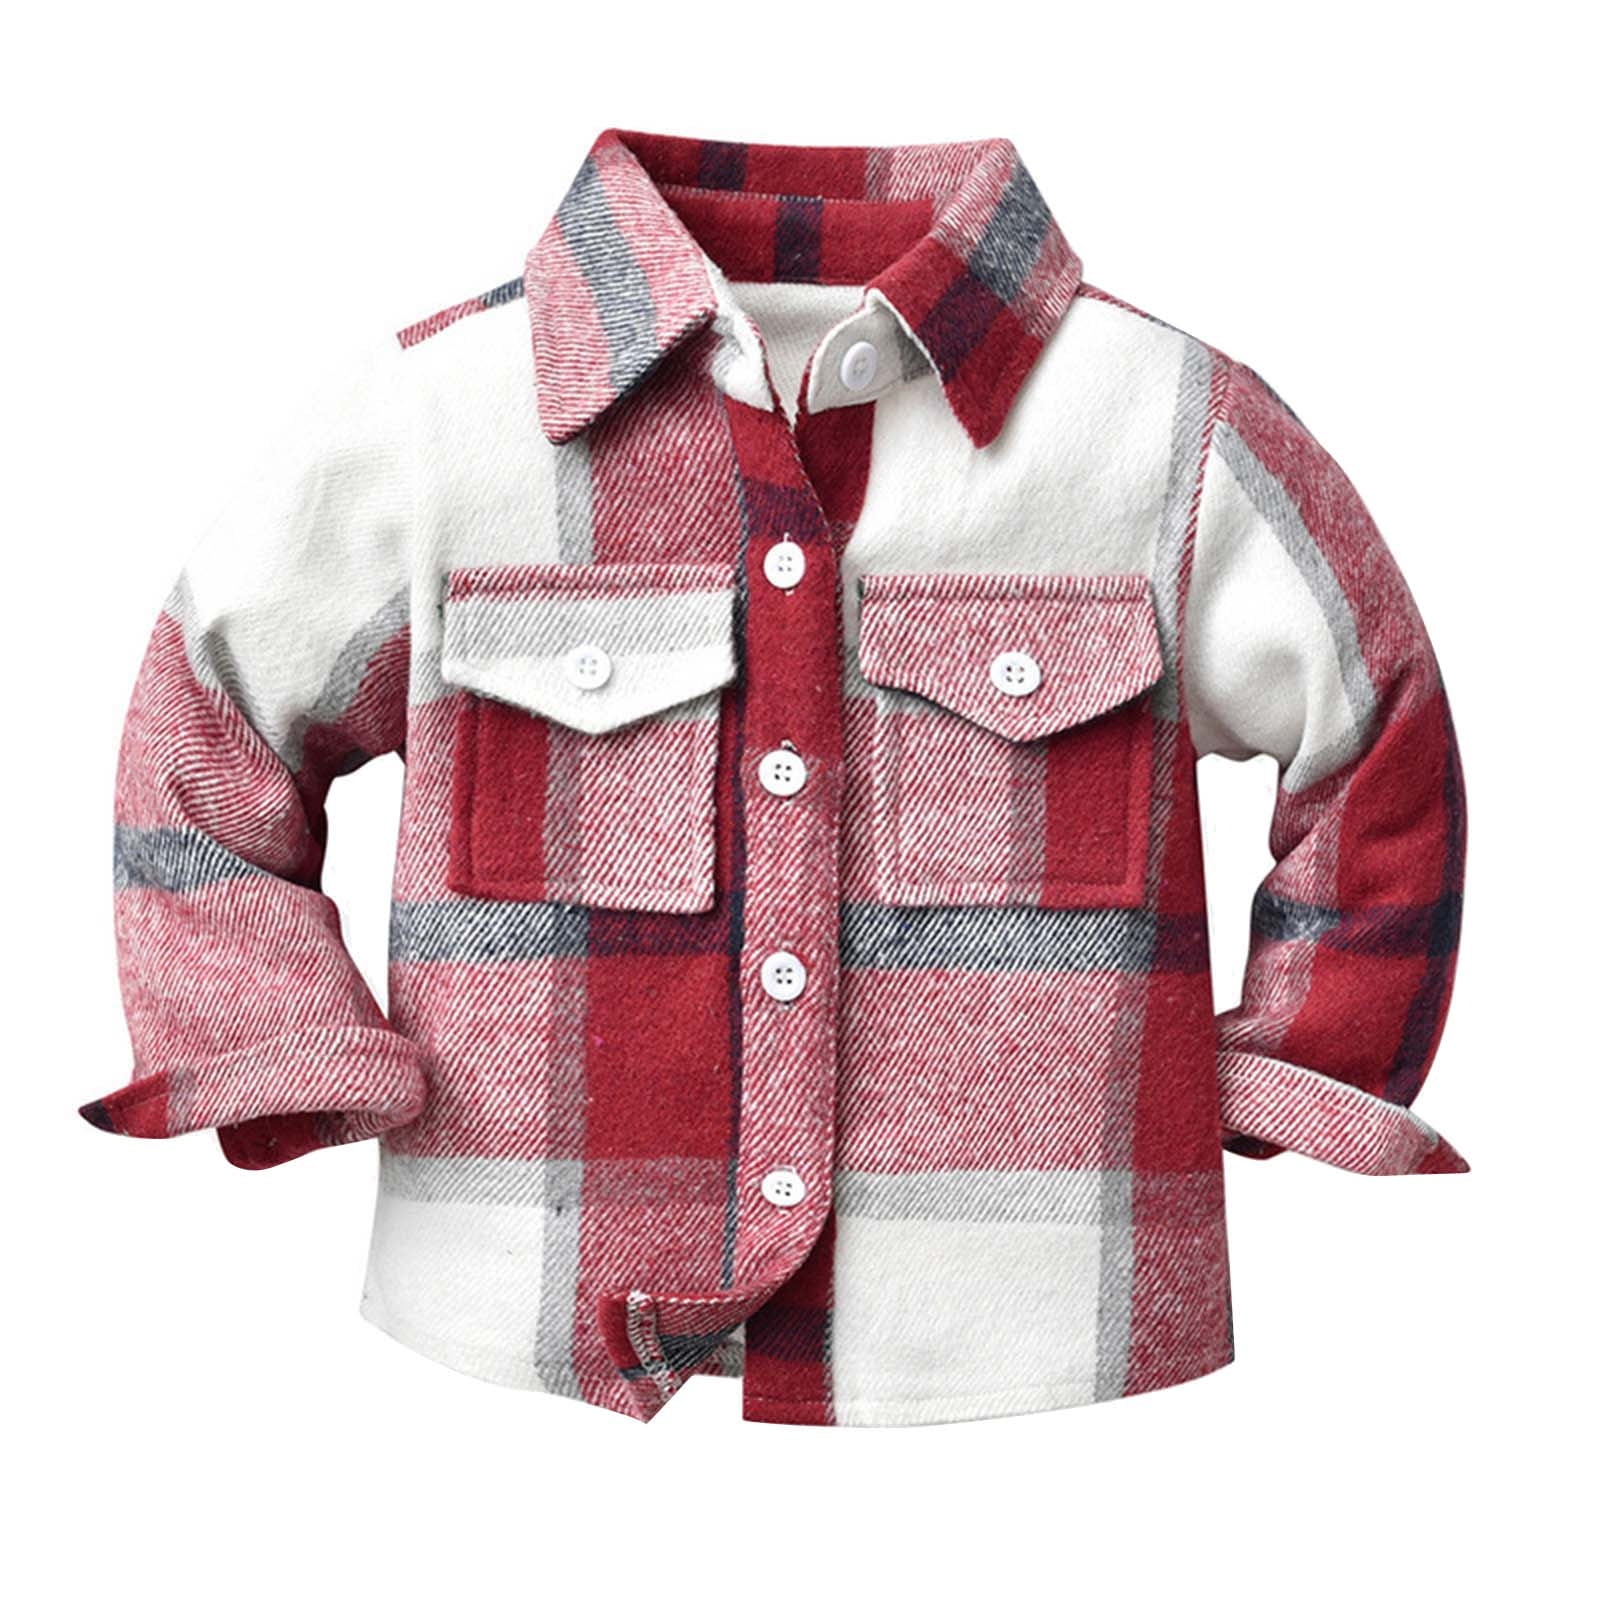 SDJMa Kids Plaid Shacket Jacket Girls Boys - Unisex Toddler Flannel Shirt  Long Sleeve Lapel Button Down Coat Baby Fall Outwear Top Clothes 3 M-10Y